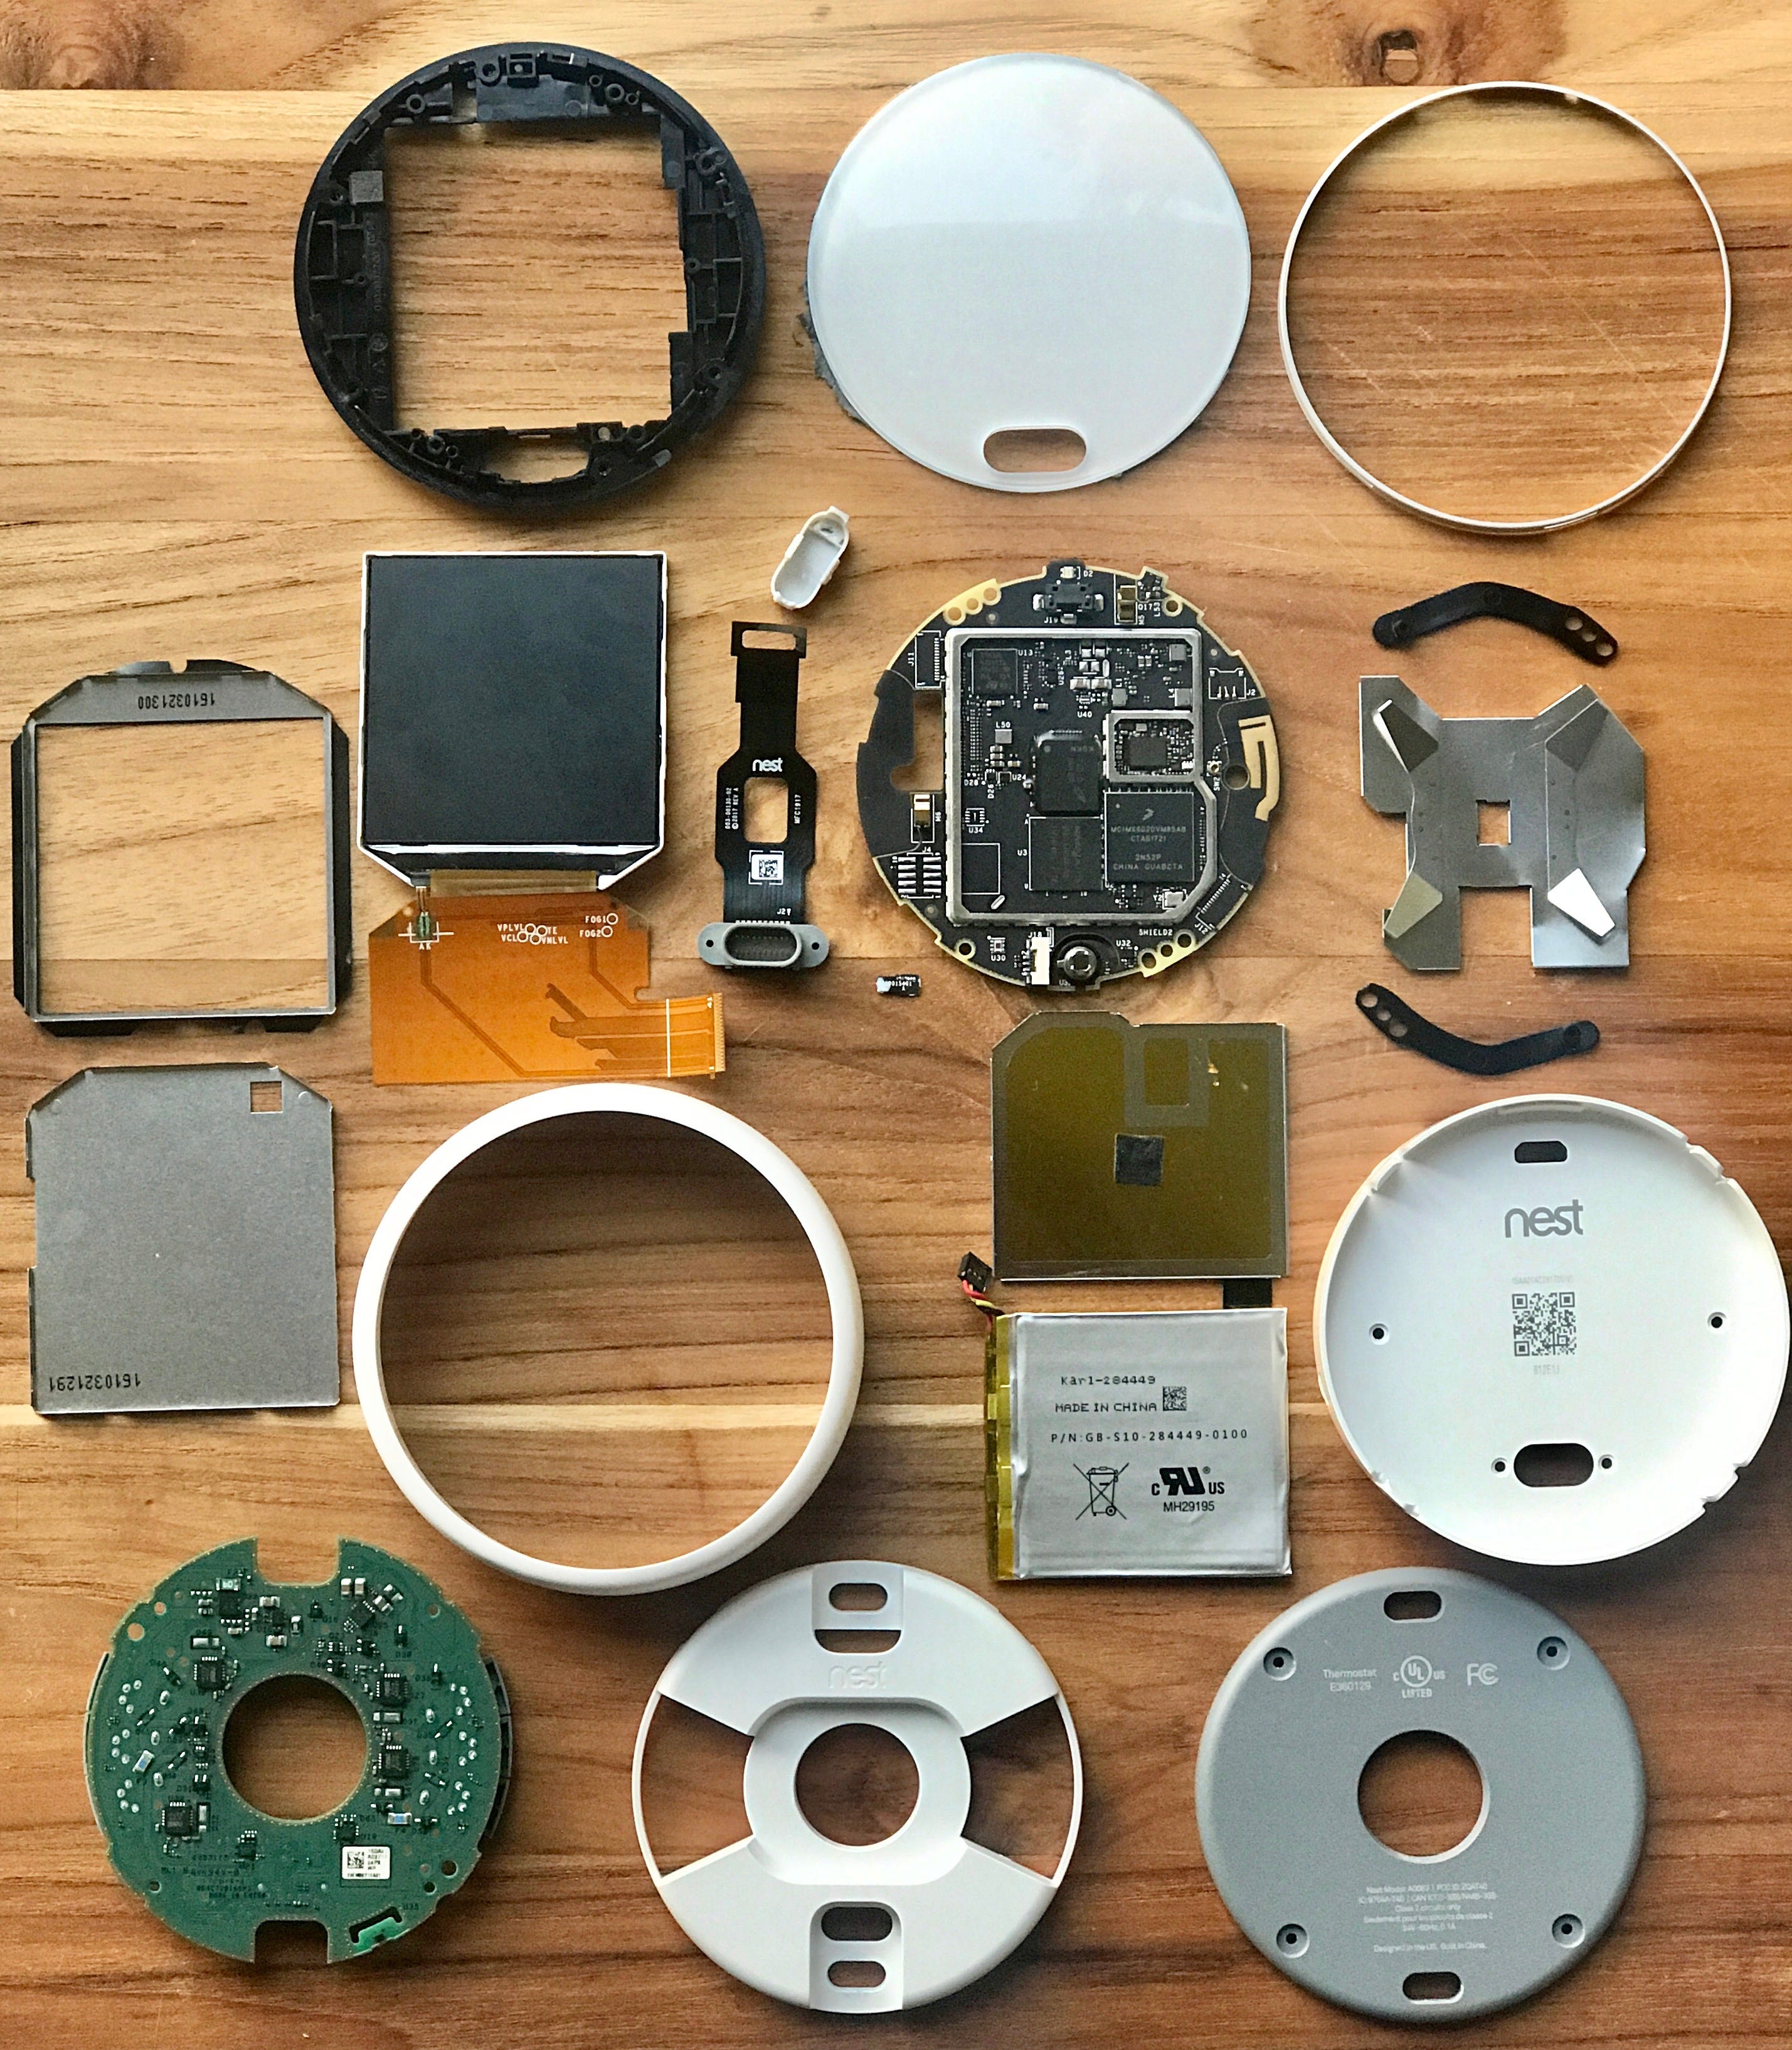 Nest Thermostat E teardown, and on making beautiful devices for